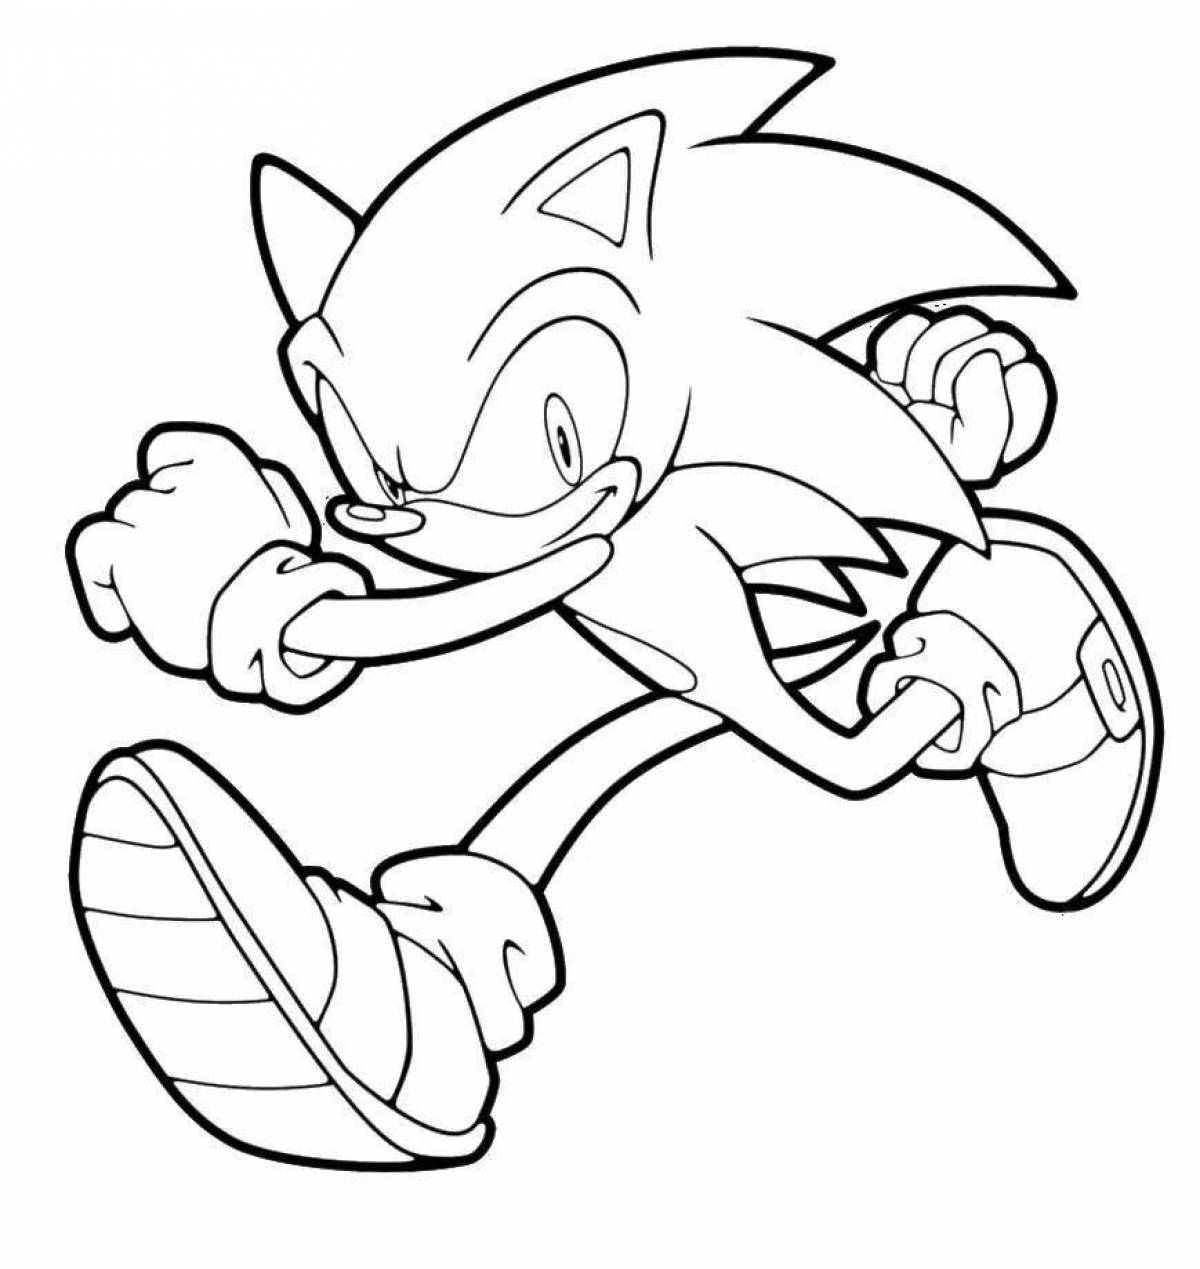 Bright sonic coloring book for children 5-6 years old